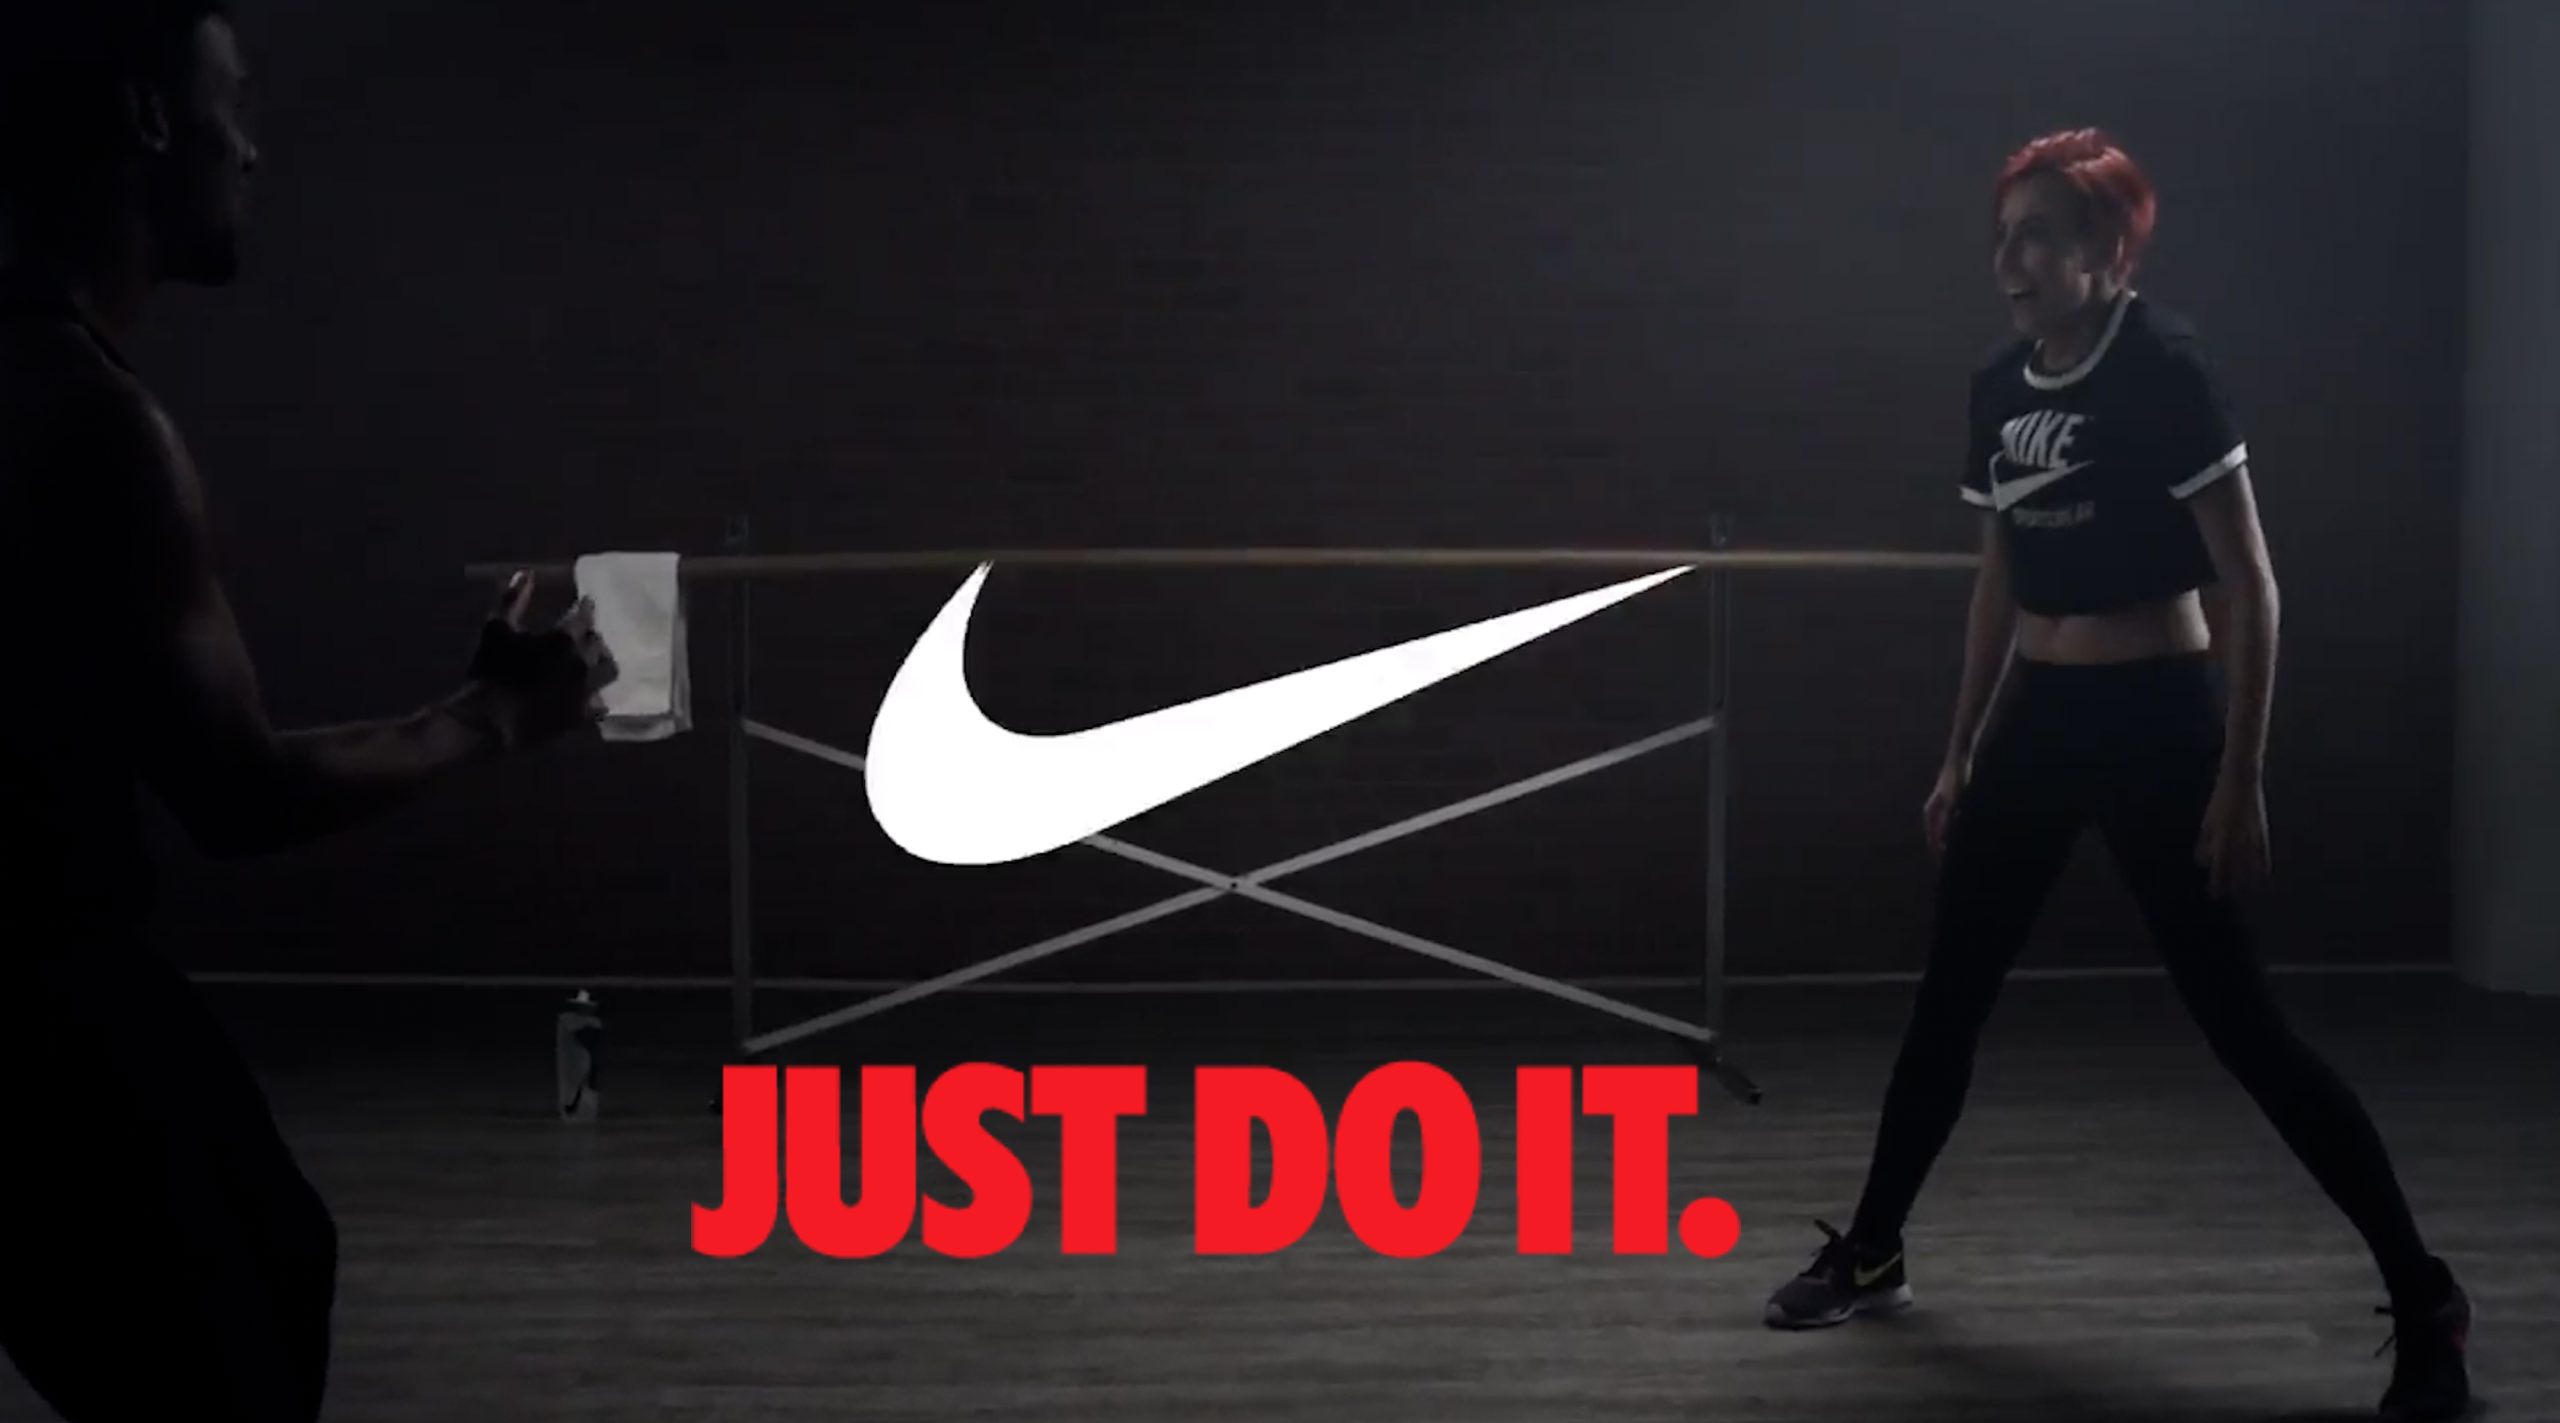 diefstal Mammoet motor Nike Spec Ad - Orange County Content Creator, Full-Service Agency, Digital  Marketing and Advertising Agency with Video Production